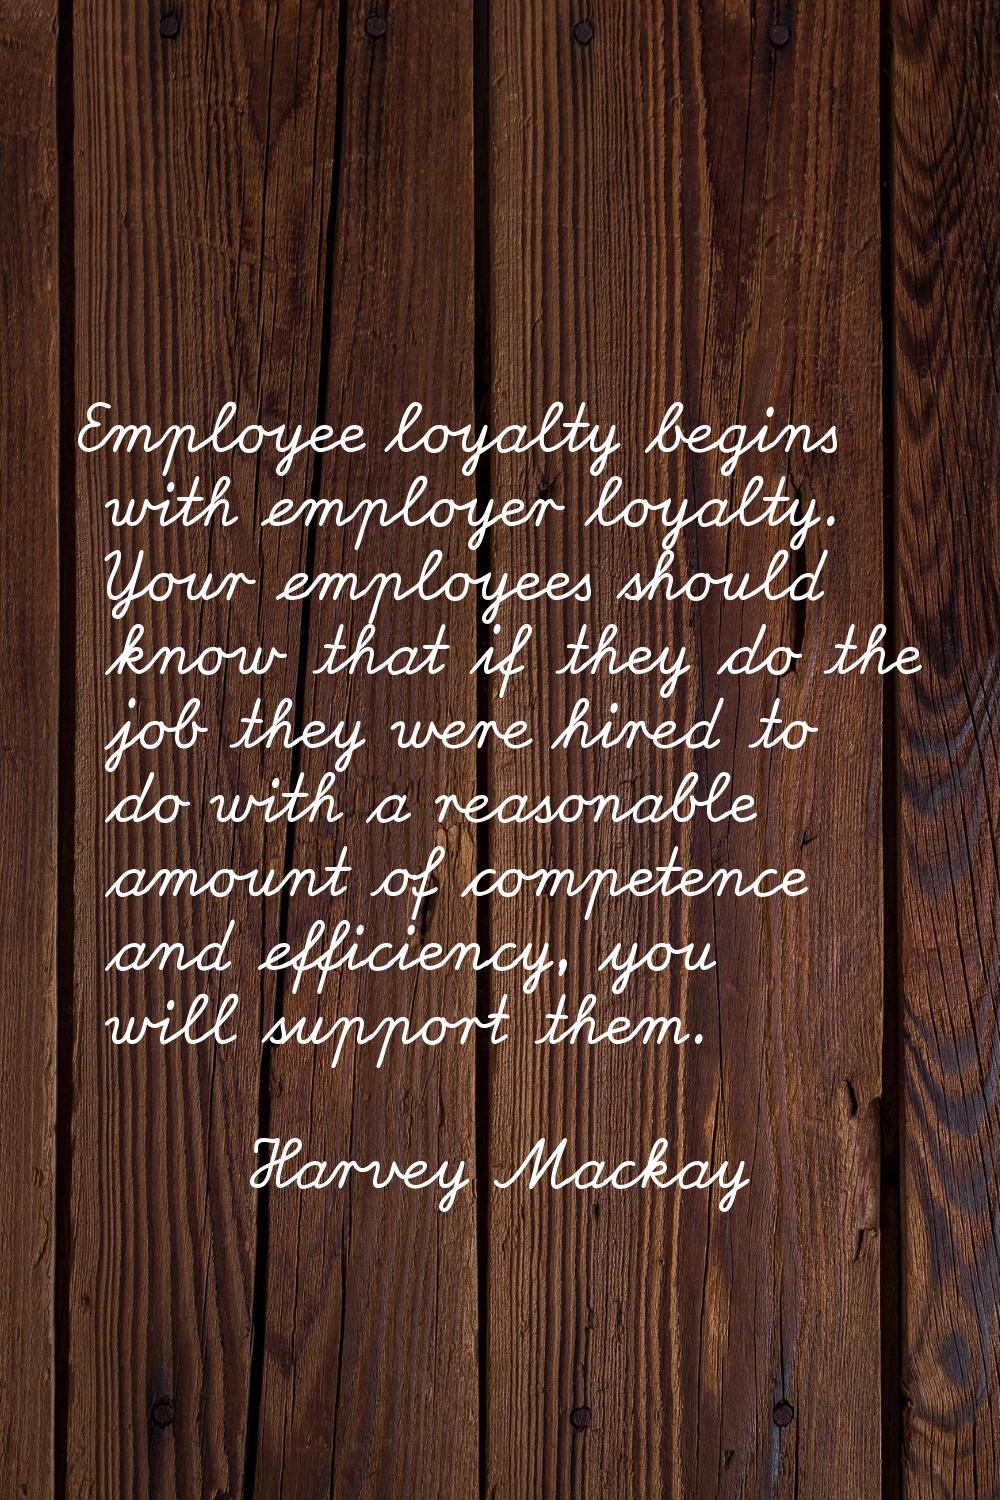 Employee loyalty begins with employer loyalty. Your employees should know that if they do the job t